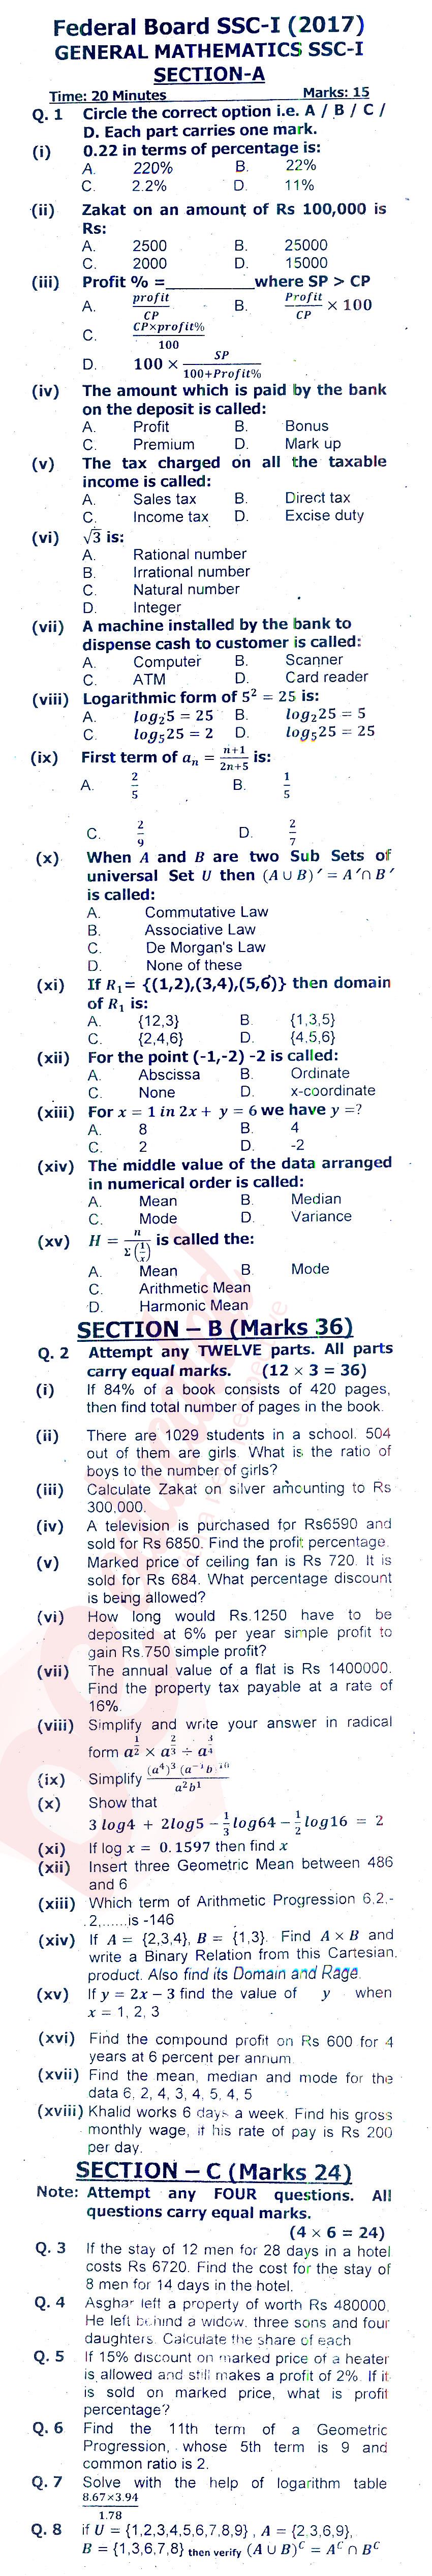 General Math 9th class Past Paper Group 1 Federal BISE  2017